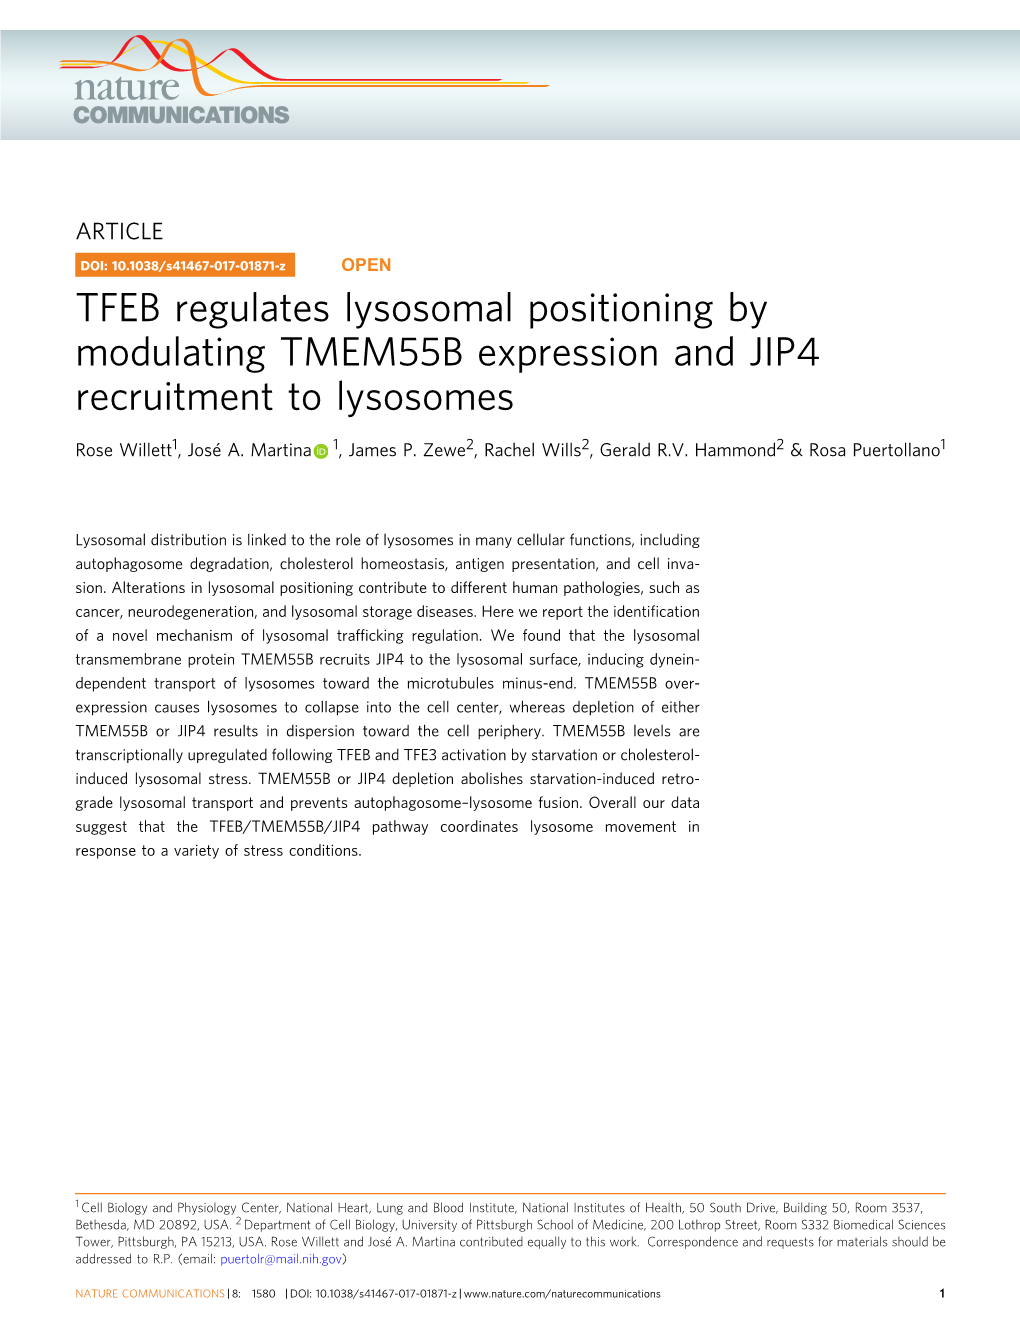 TFEB Regulates Lysosomal Positioning by Modulating TMEM55B Expression and JIP4 Recruitment to Lysosomes